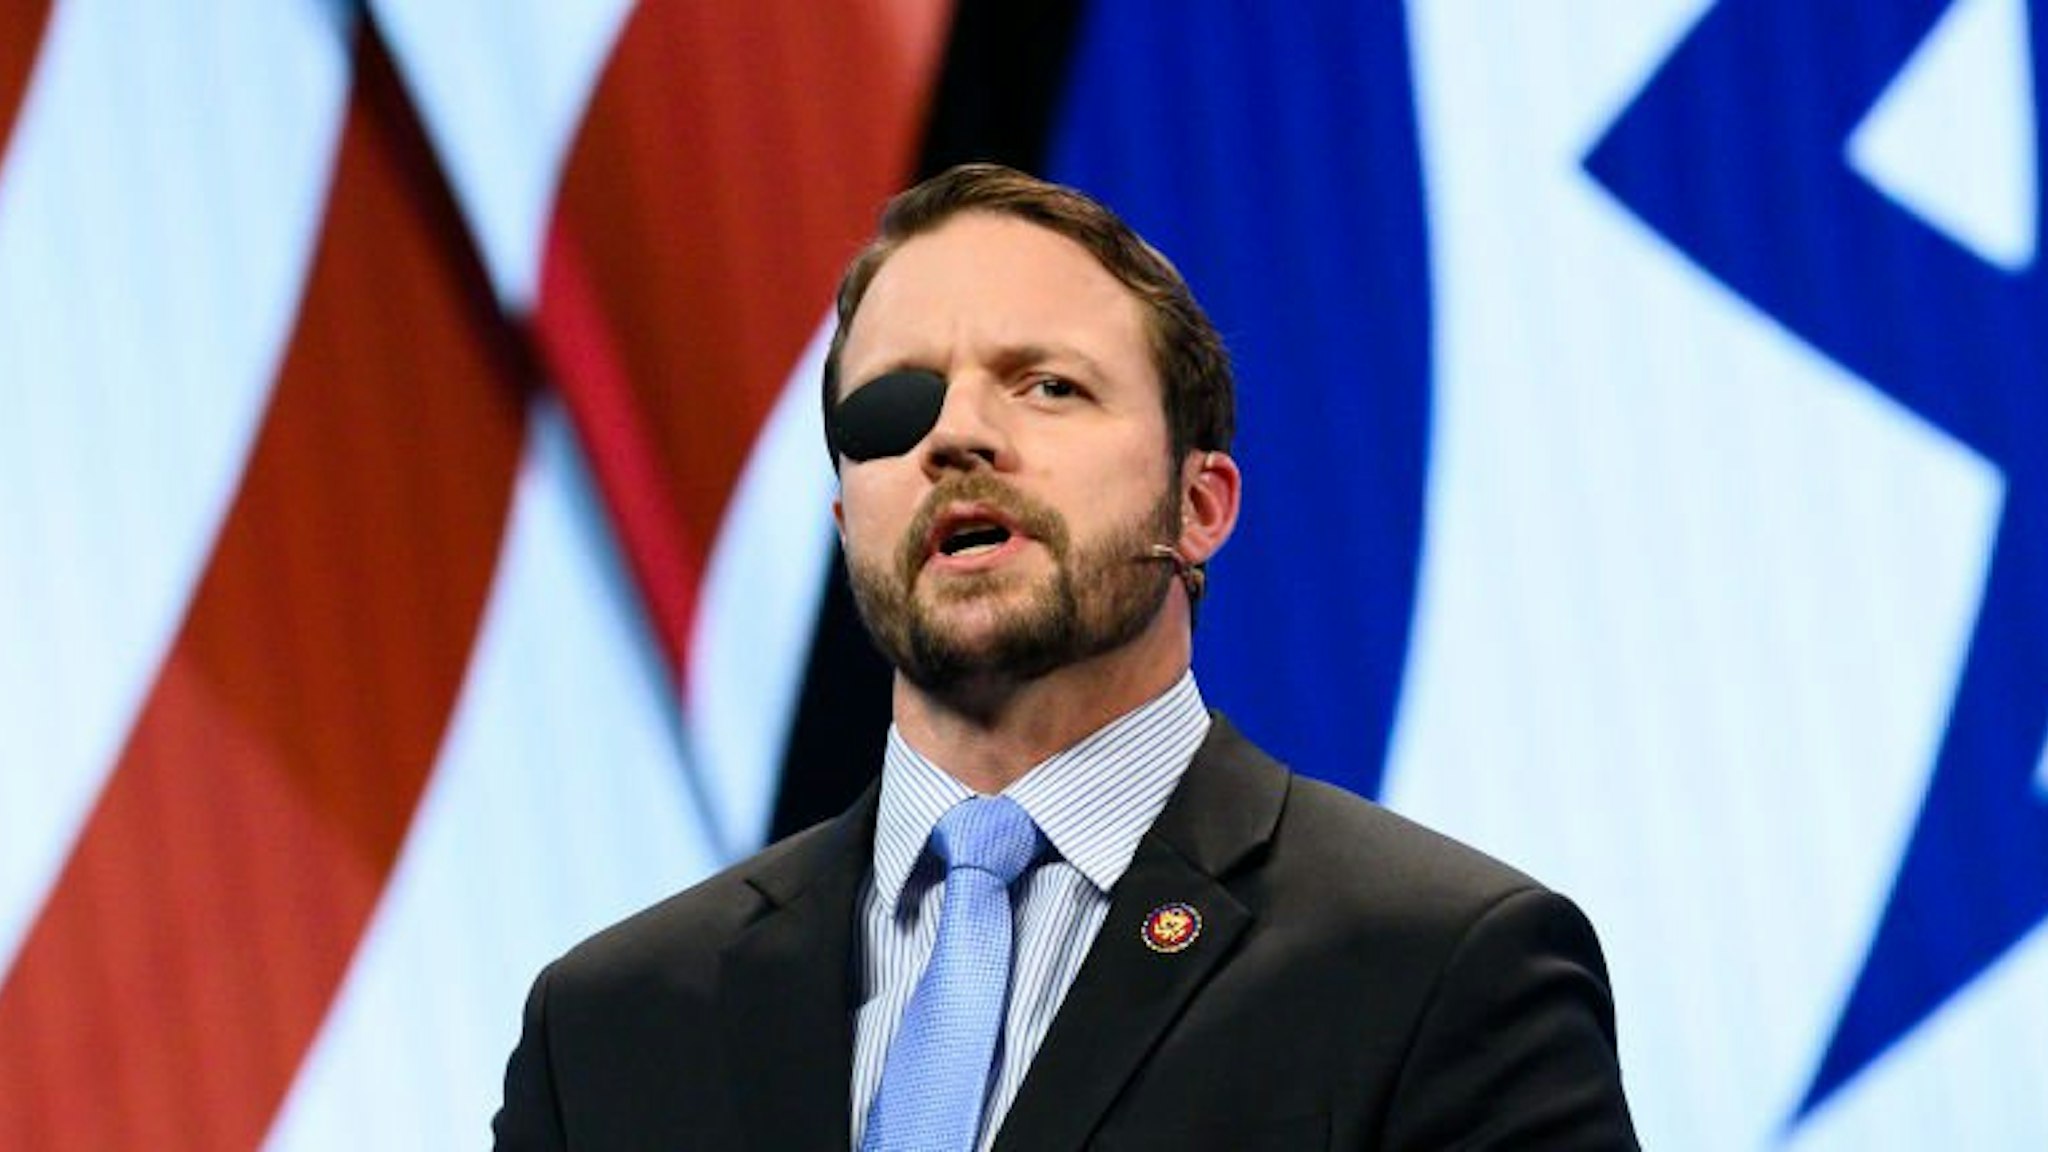 U.S. Representative Dan Crenshaw (R-TX) seen speaking during the American Israel Public Affairs Committee (AIPAC) Policy Conference in Washington, DC.